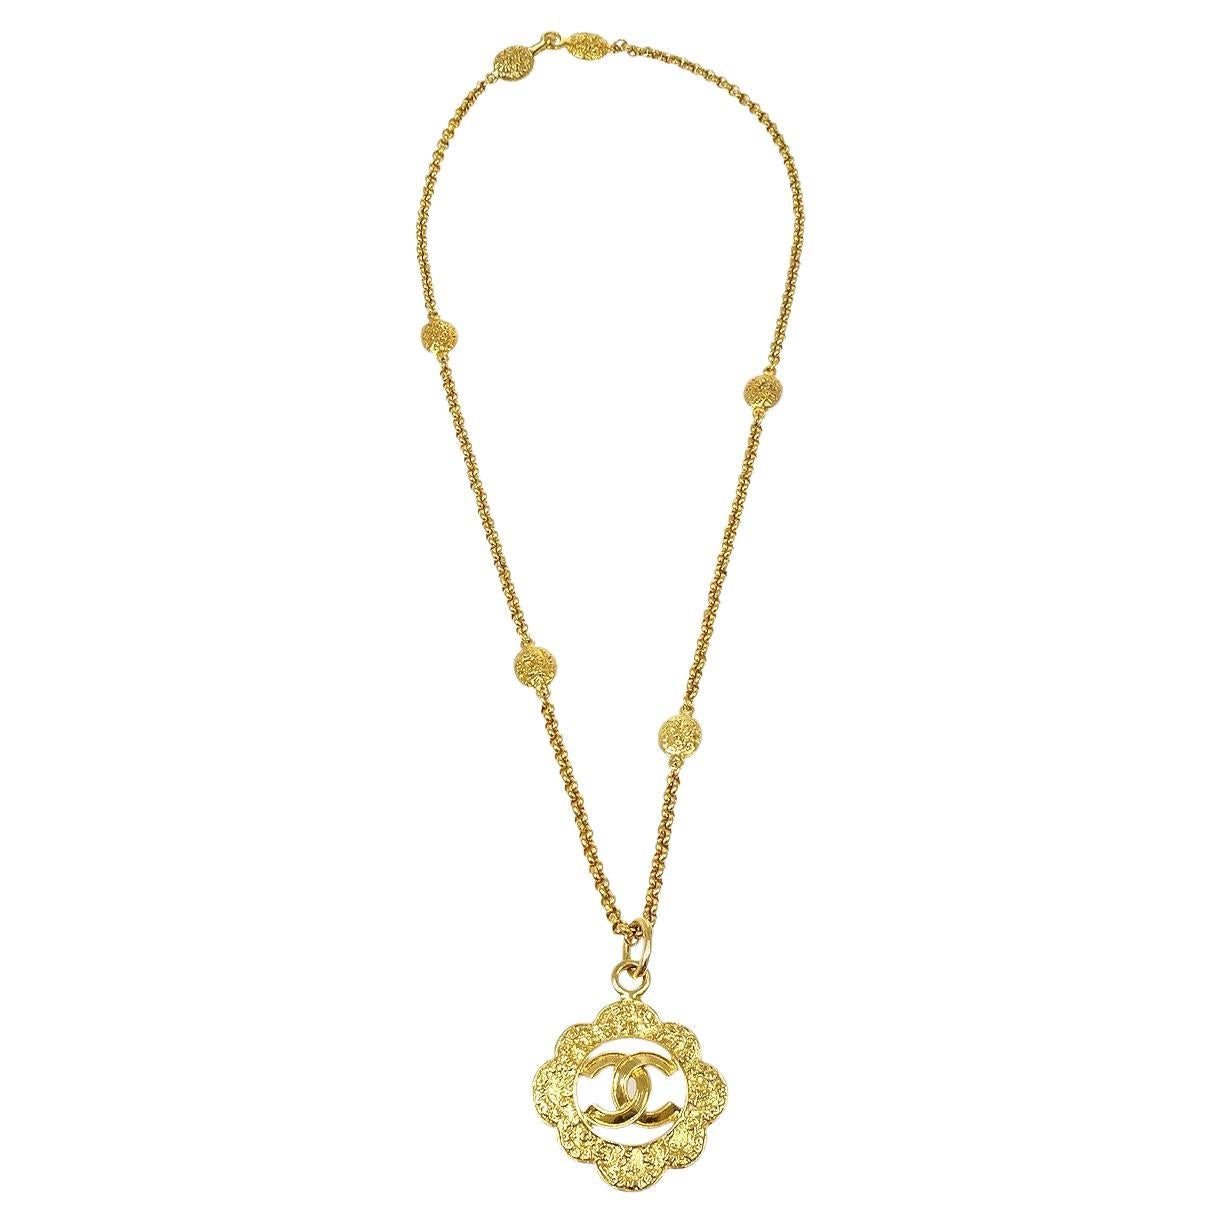 CHANEL CC Flower Gold Metal Charm Chain Link Necklace 